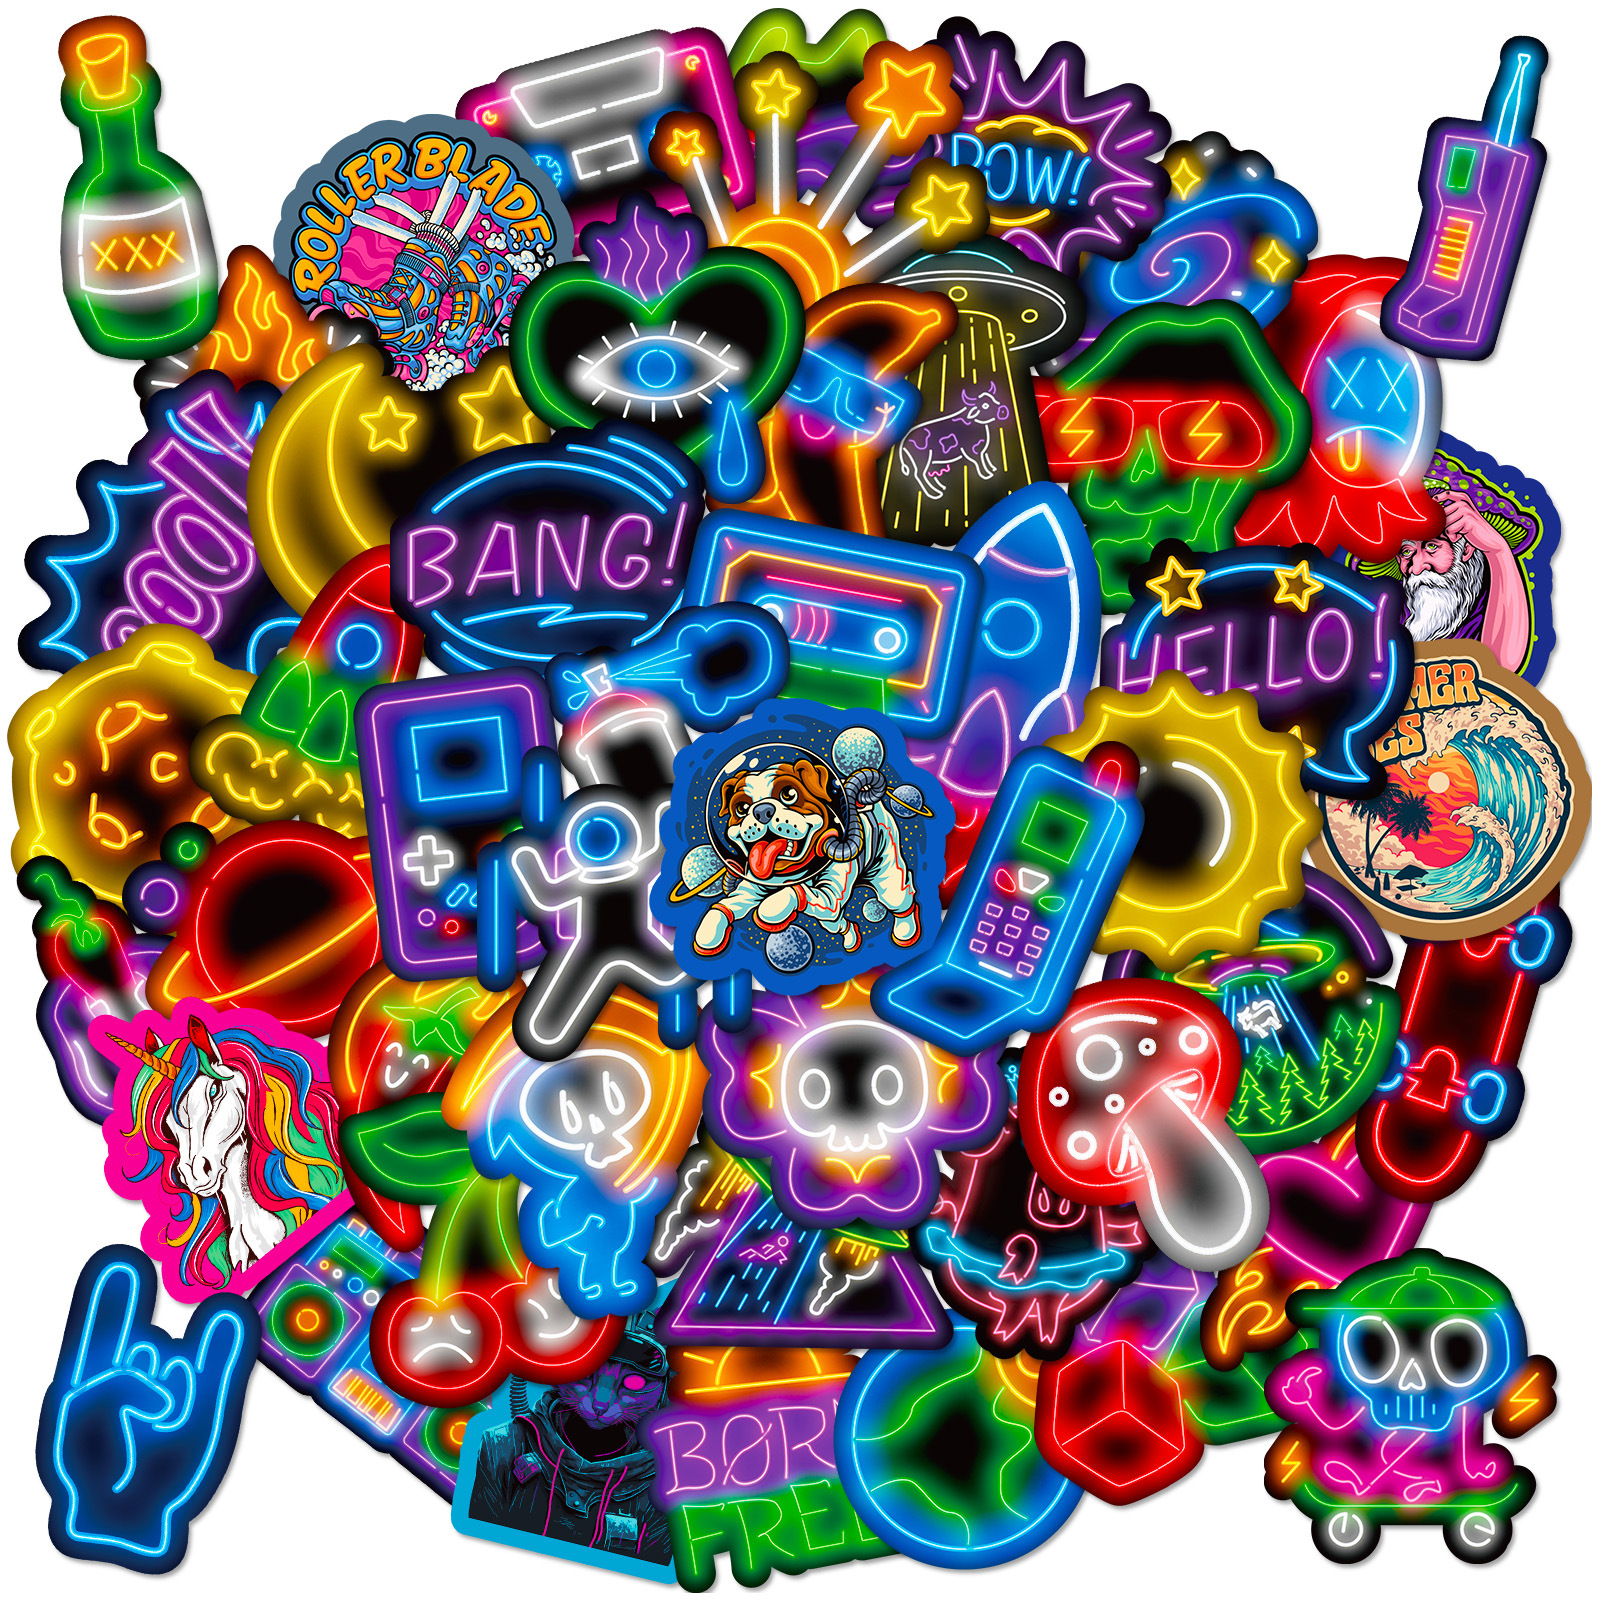 52PCS Hot Alphabet lore DIY Funny Stickers Cool For Kids Toys Notebook  Luggage Motorcycle Laptop Refrigerator Decals Graffiti